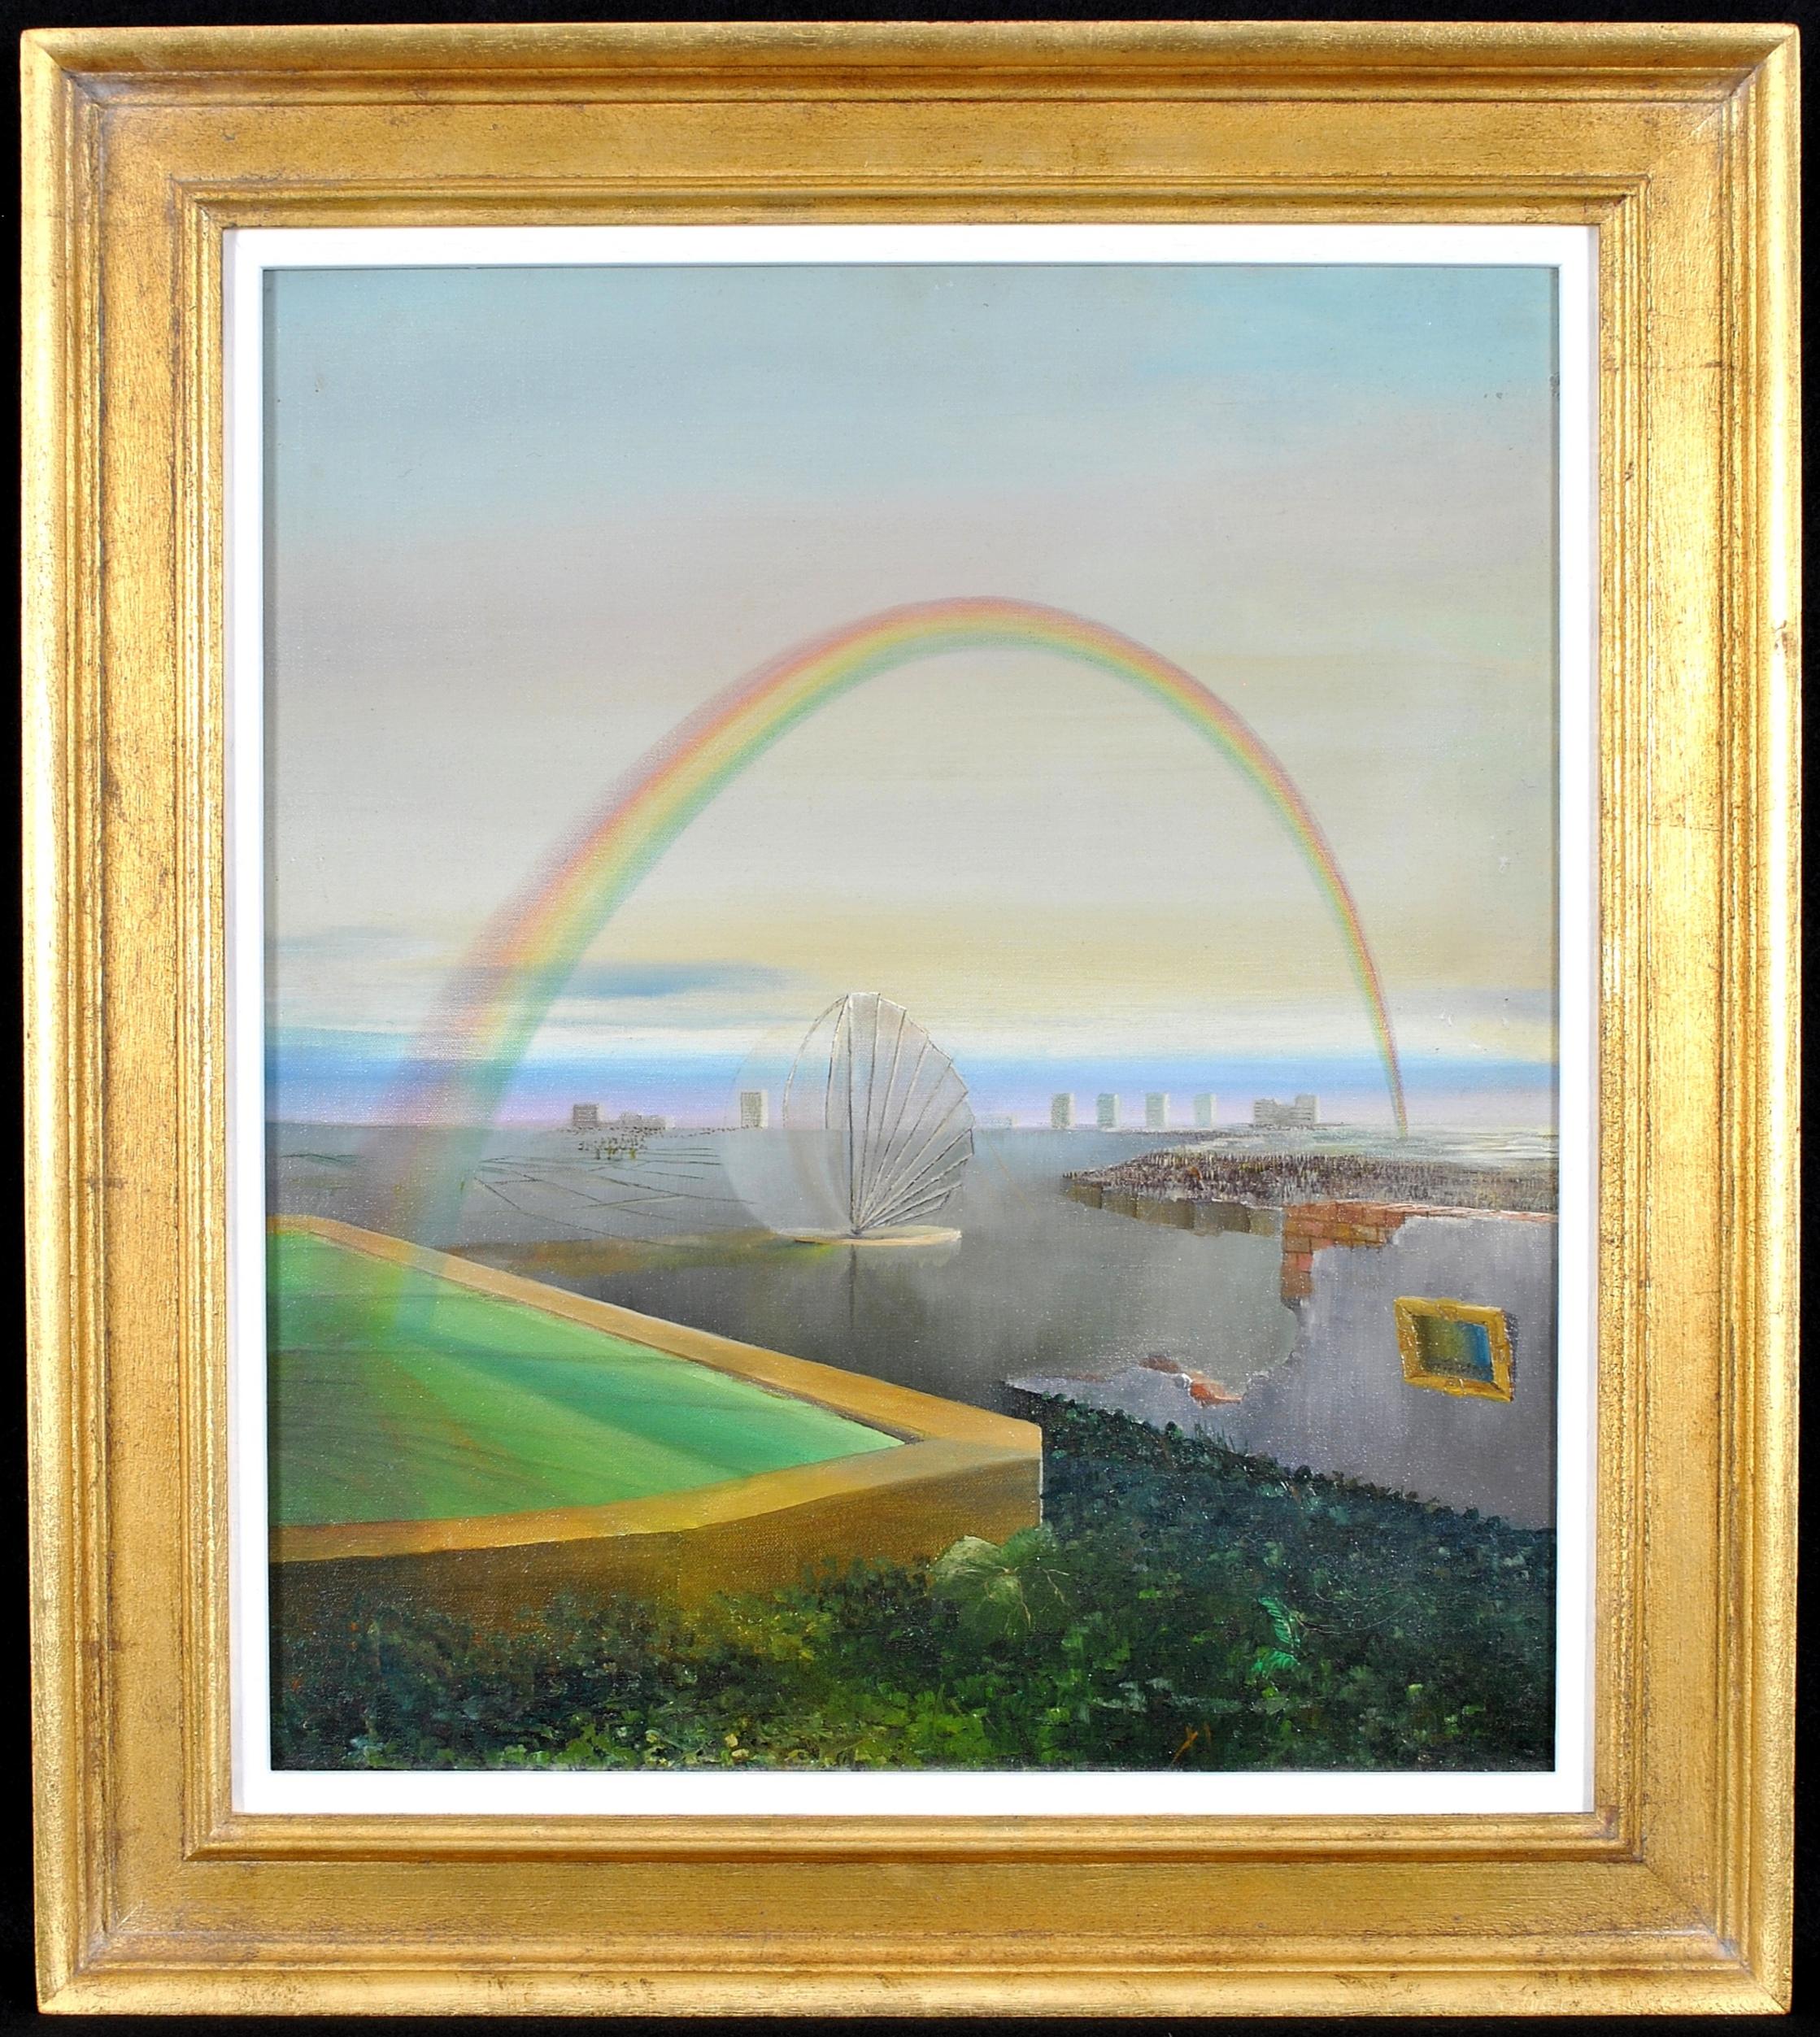 Surreal Landscape - Mid 20th Century English Surrealist Oil on Canvas Painting For Sale 3